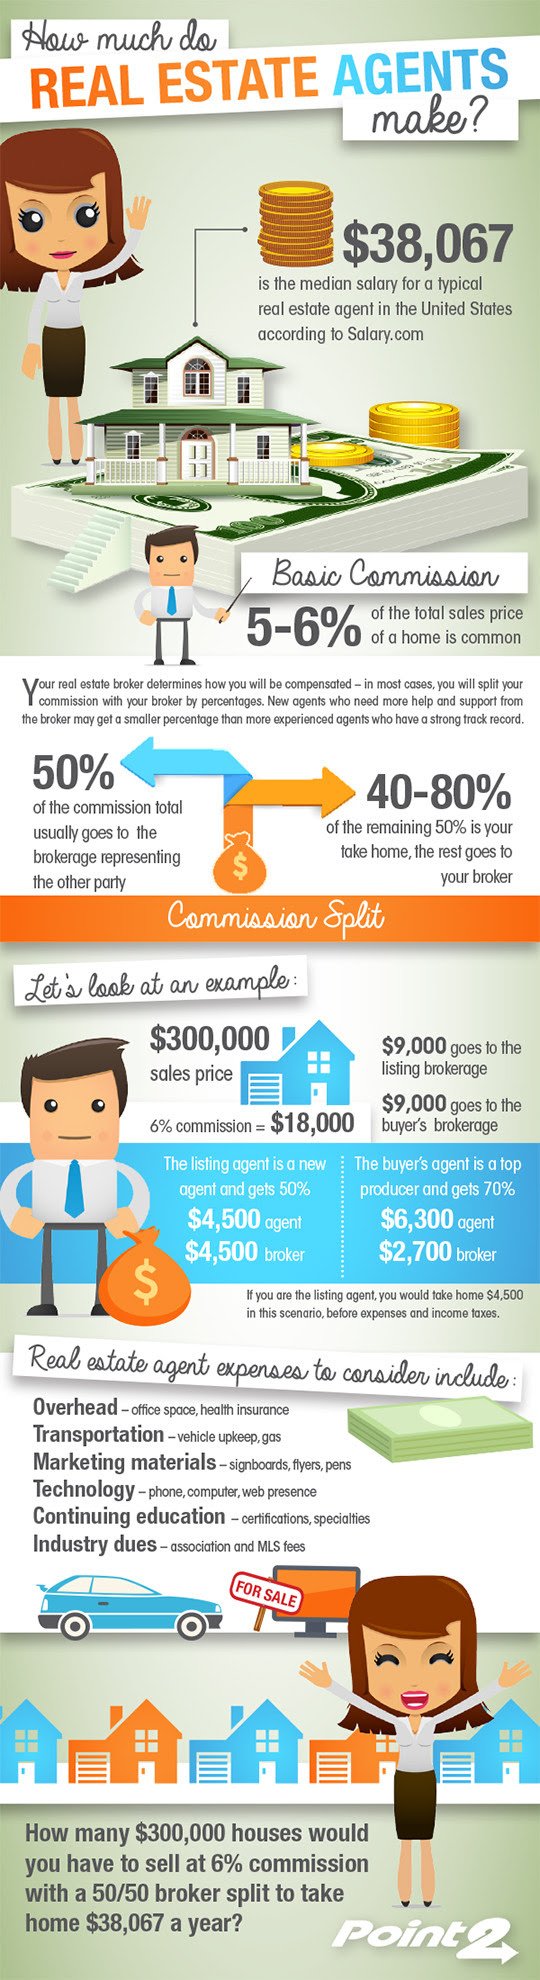 how much does the broker make from the real estate transaction